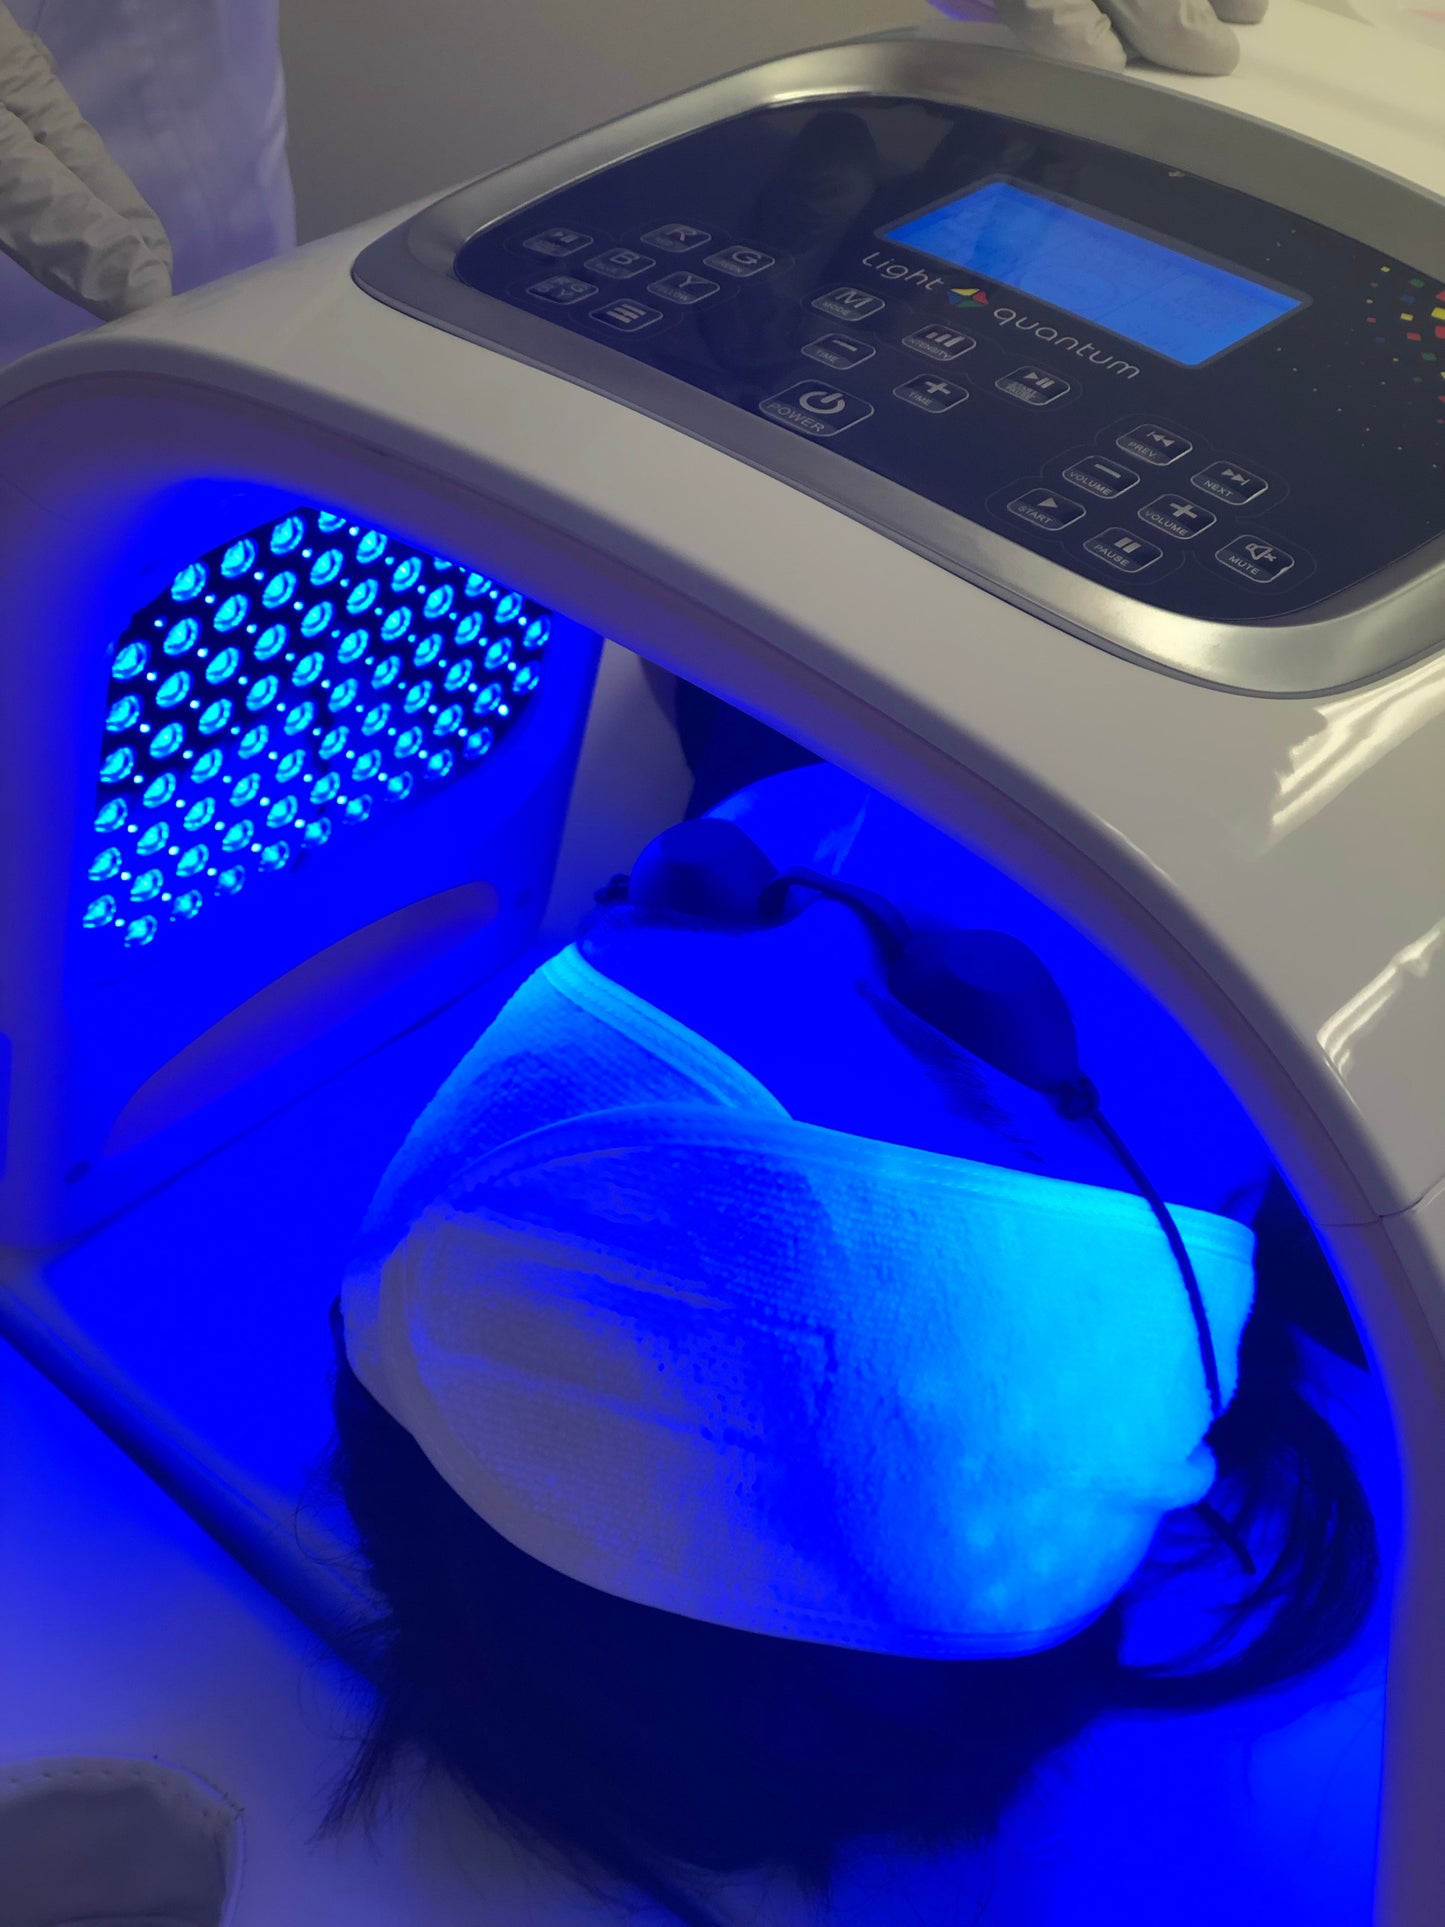 Pro Light Therapy and Microcurrent